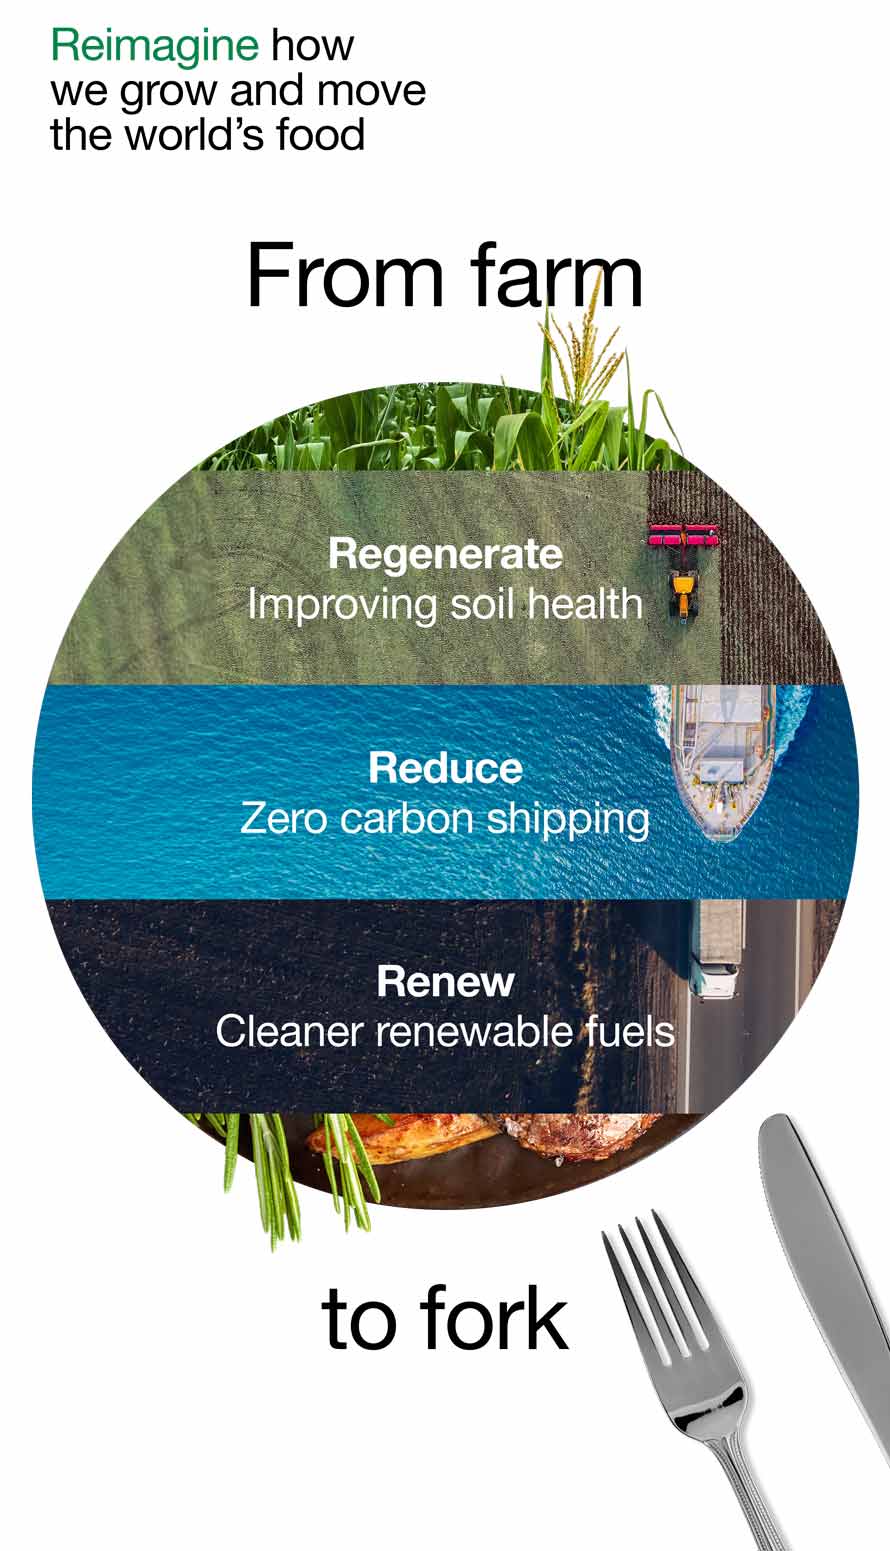 From farm to fork - Regenerarate, improving soil health - Reduce, zero carbon shipping - Renew, cleaner renewable fuels